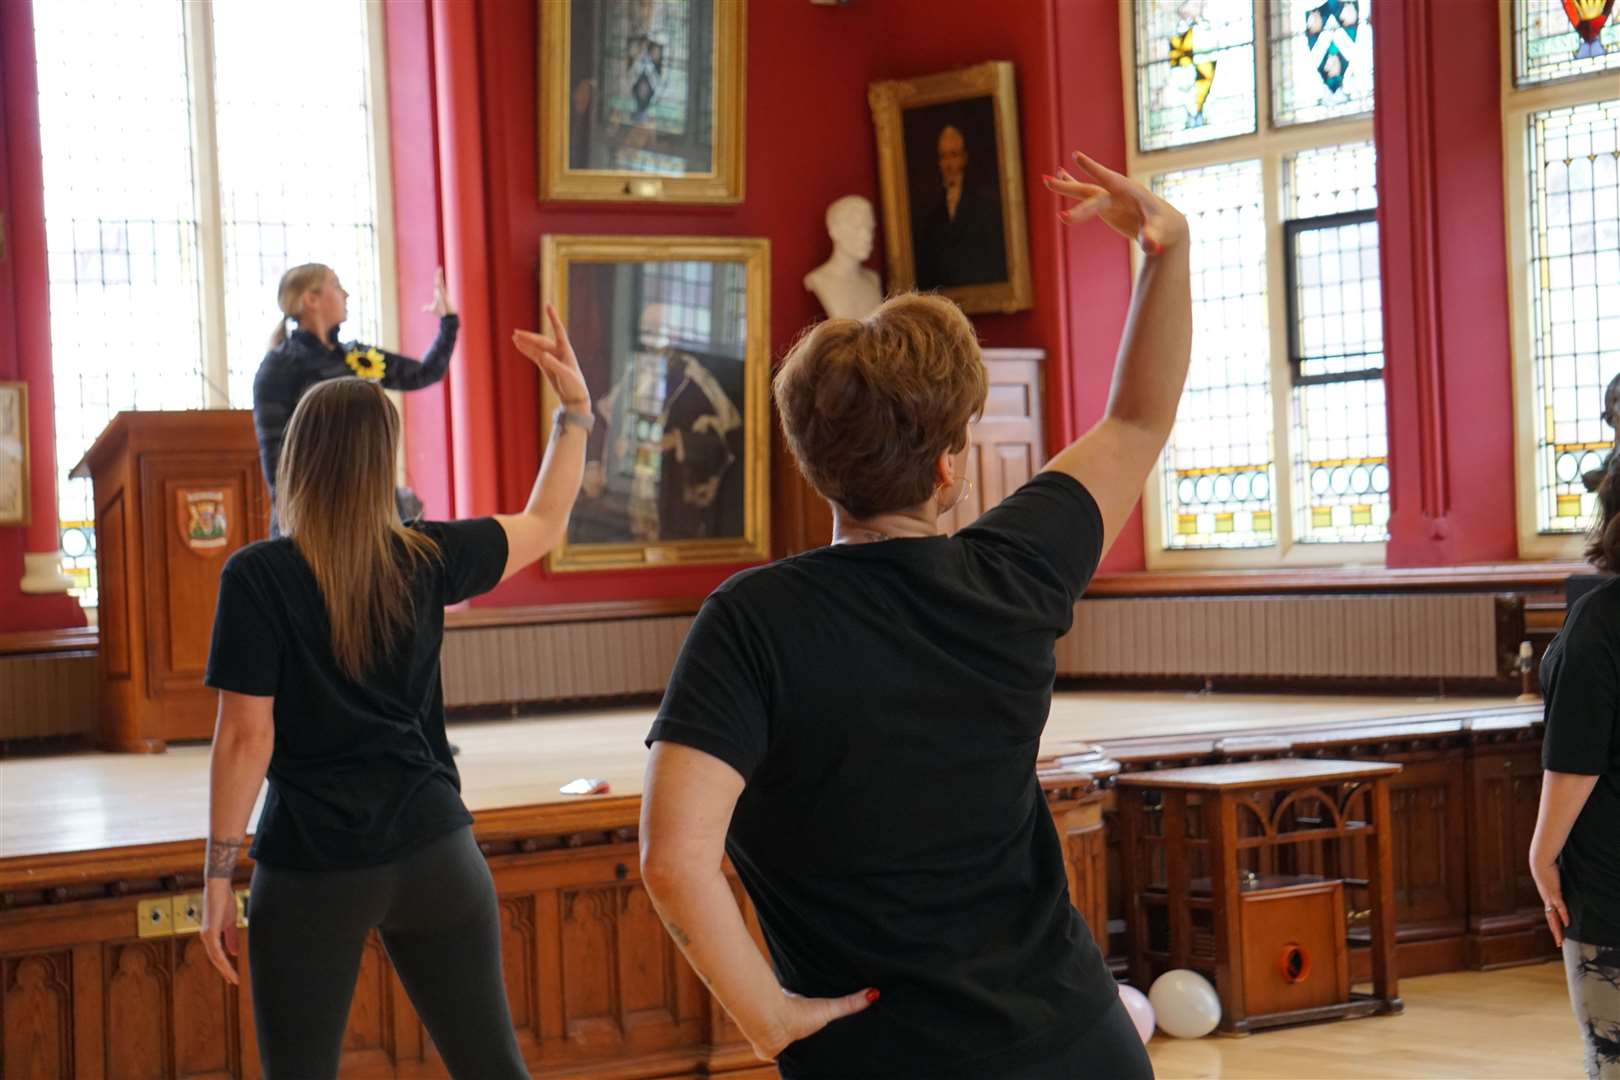 The main hall of the Inverness Town House turned into a dance studio for the occasion. Picture: Federica Stefani.